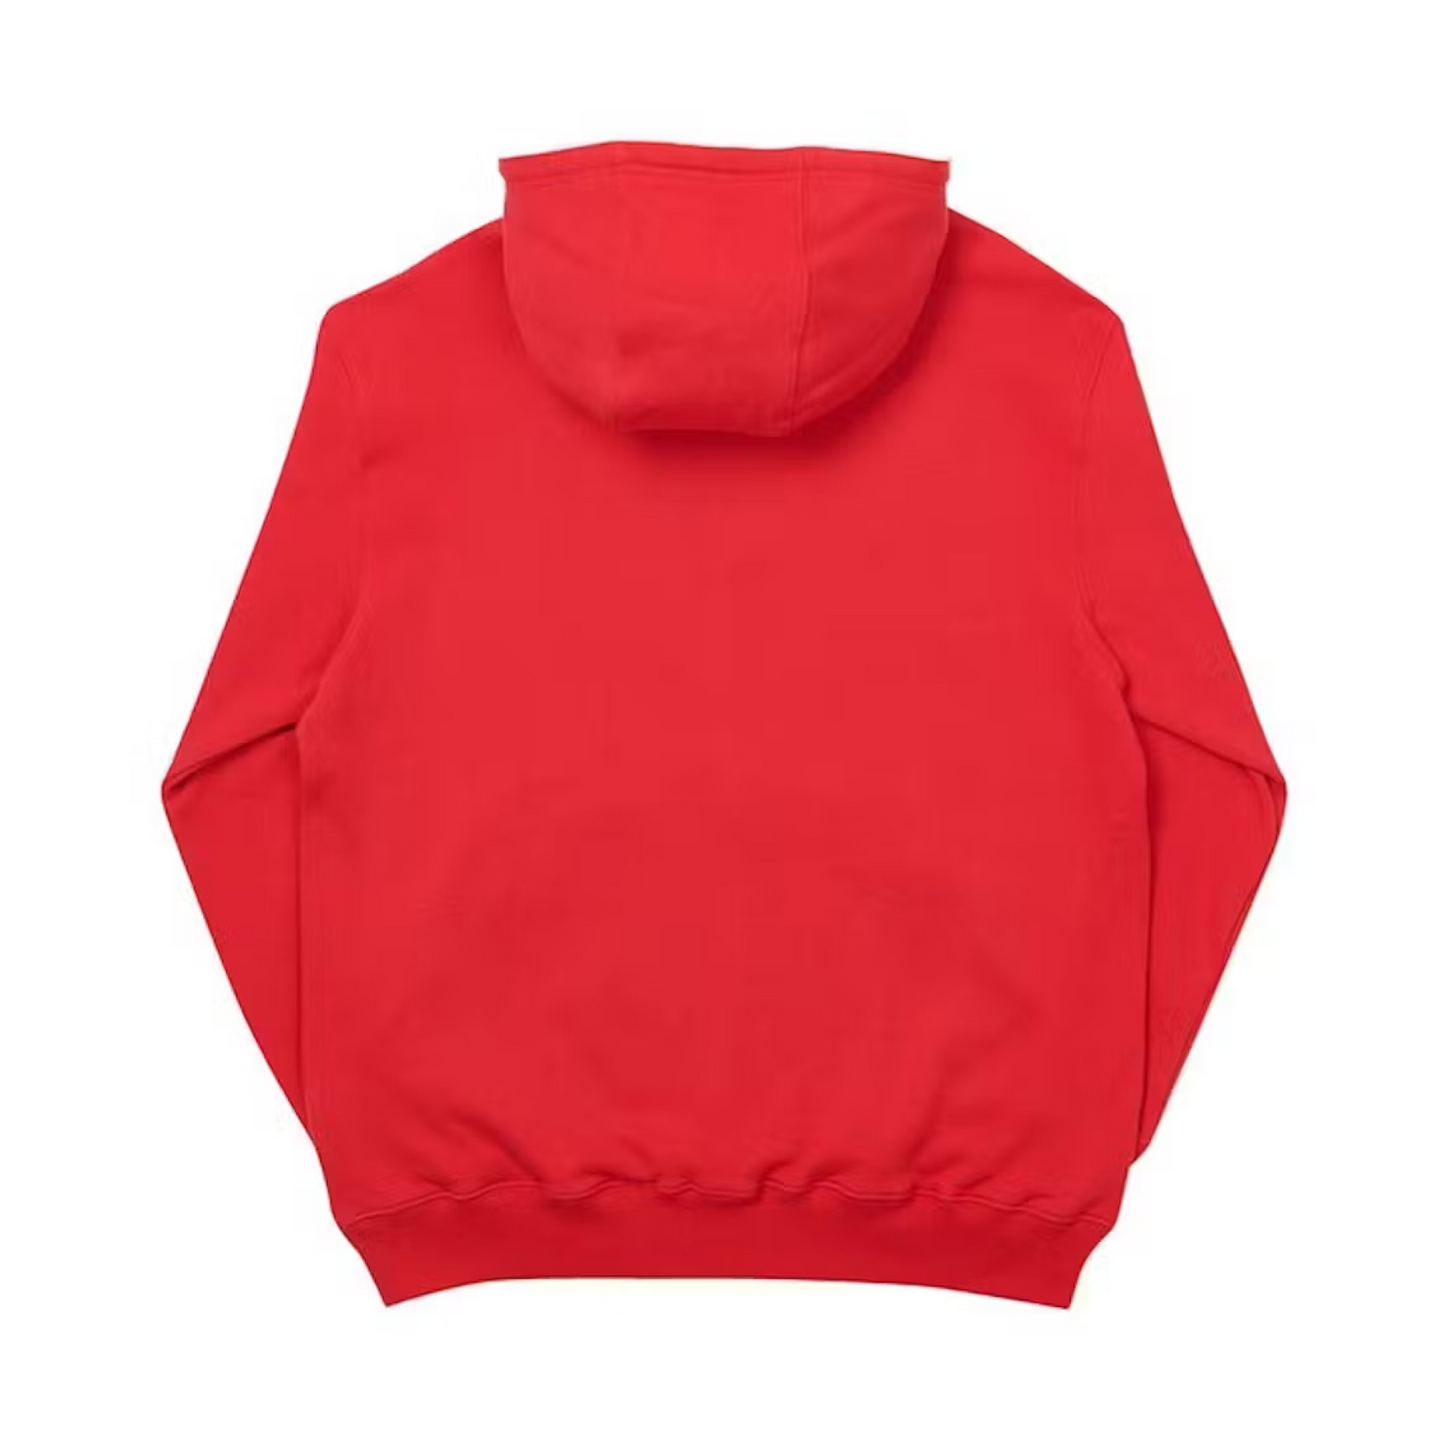 Palace Pipeline Hood Red